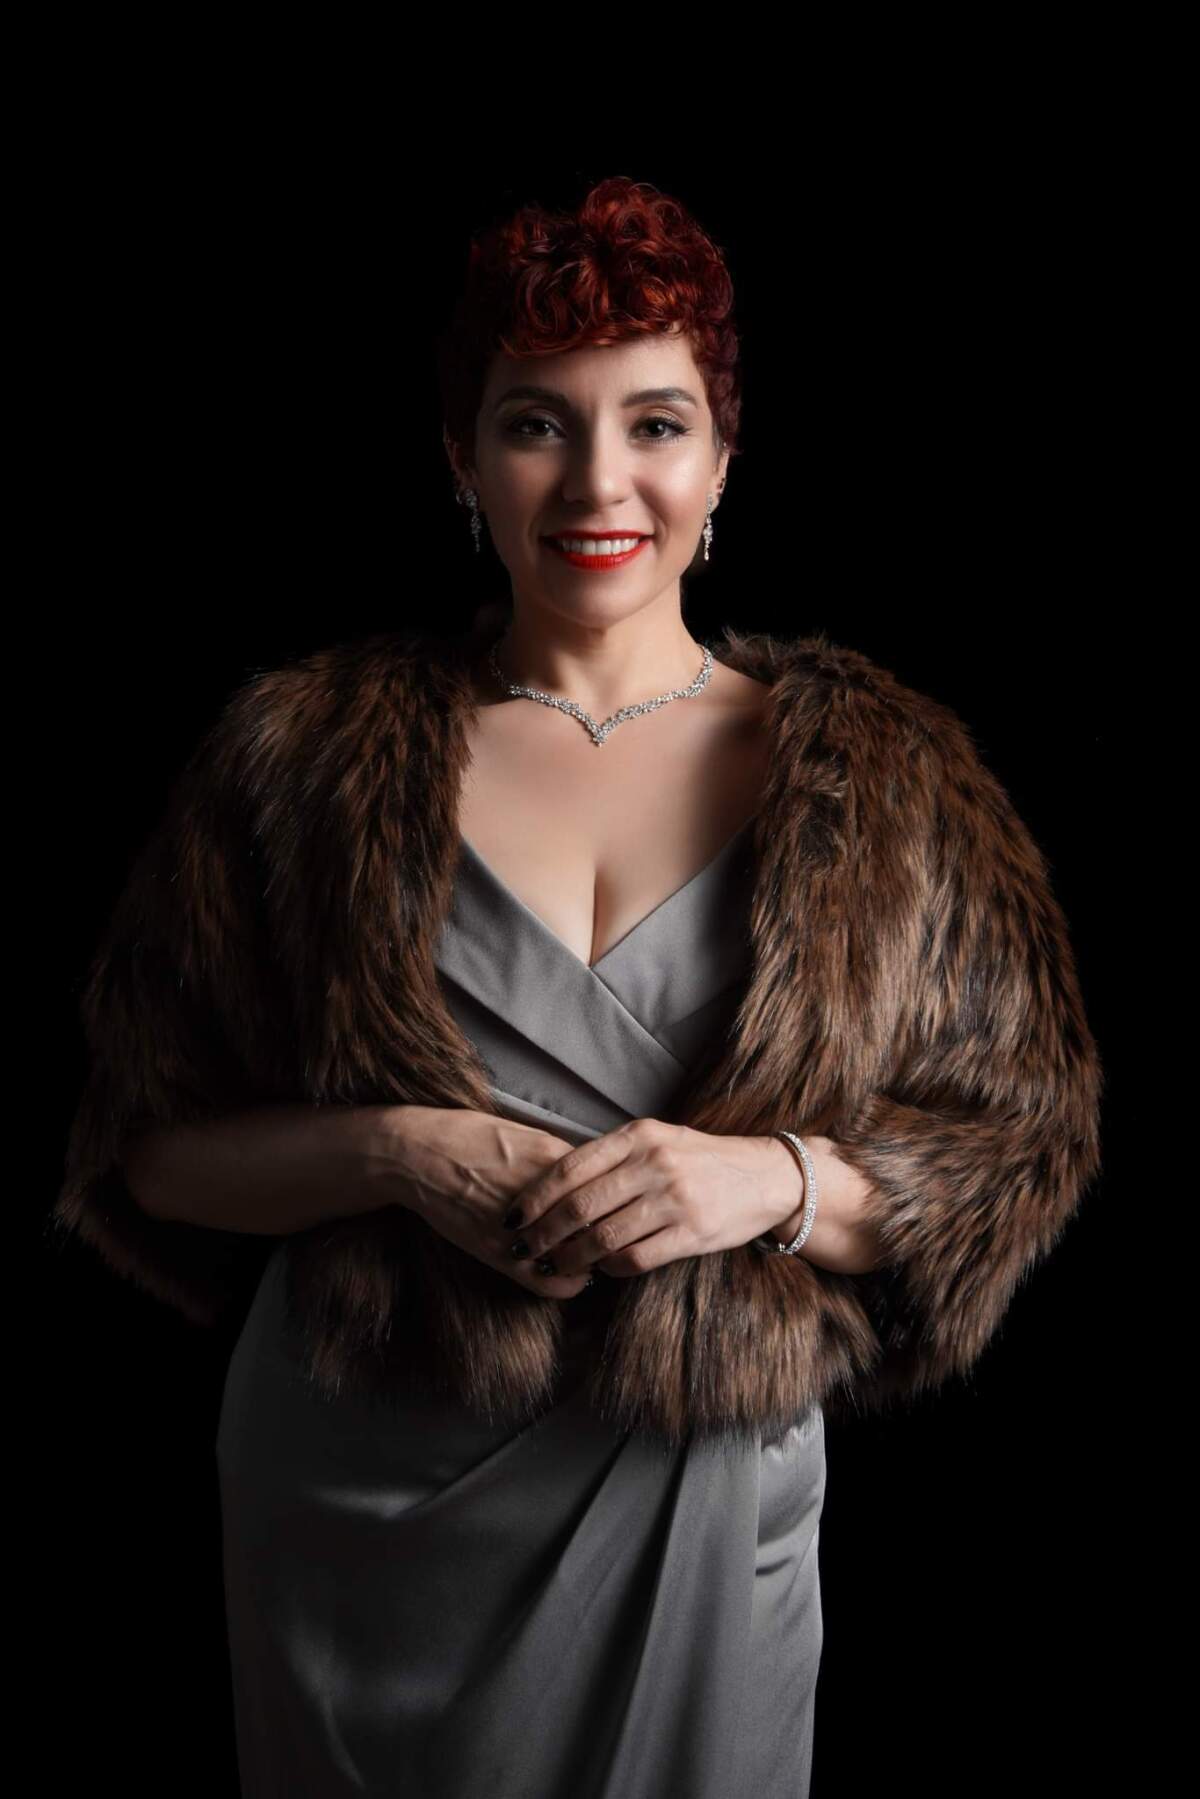 Norma Navarrete will perform as part of the La Jolla Community Center's Opera Wednesday on November 9th.